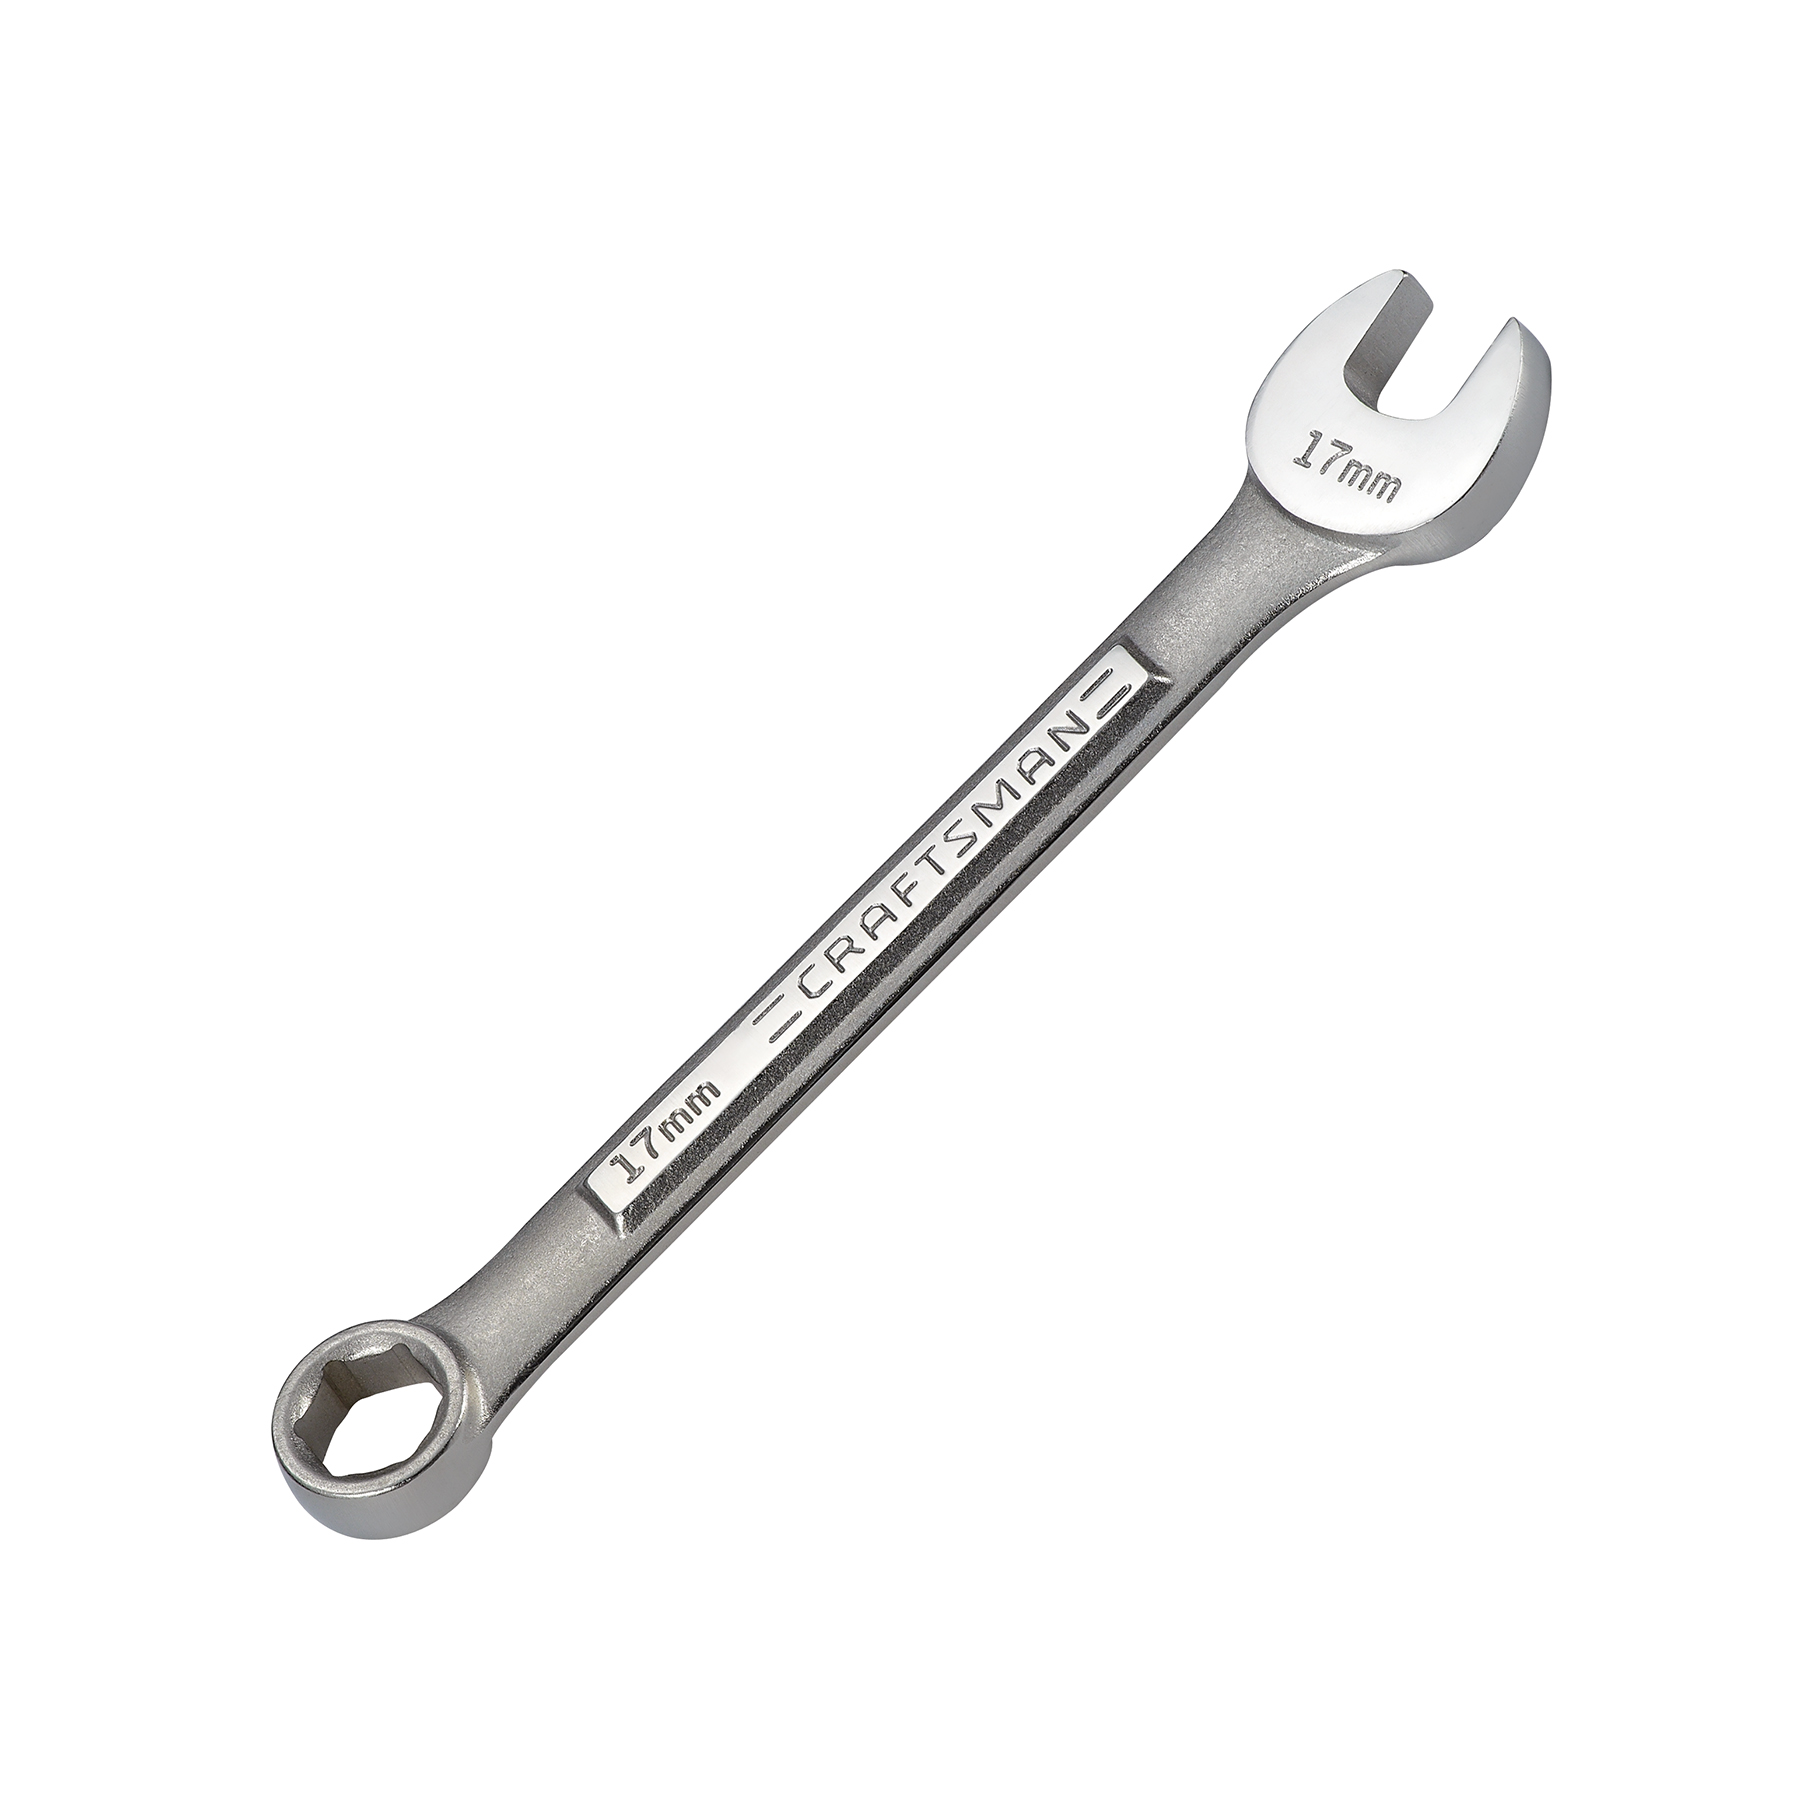 Craftsman 17mm 6 Point Combination Wrench